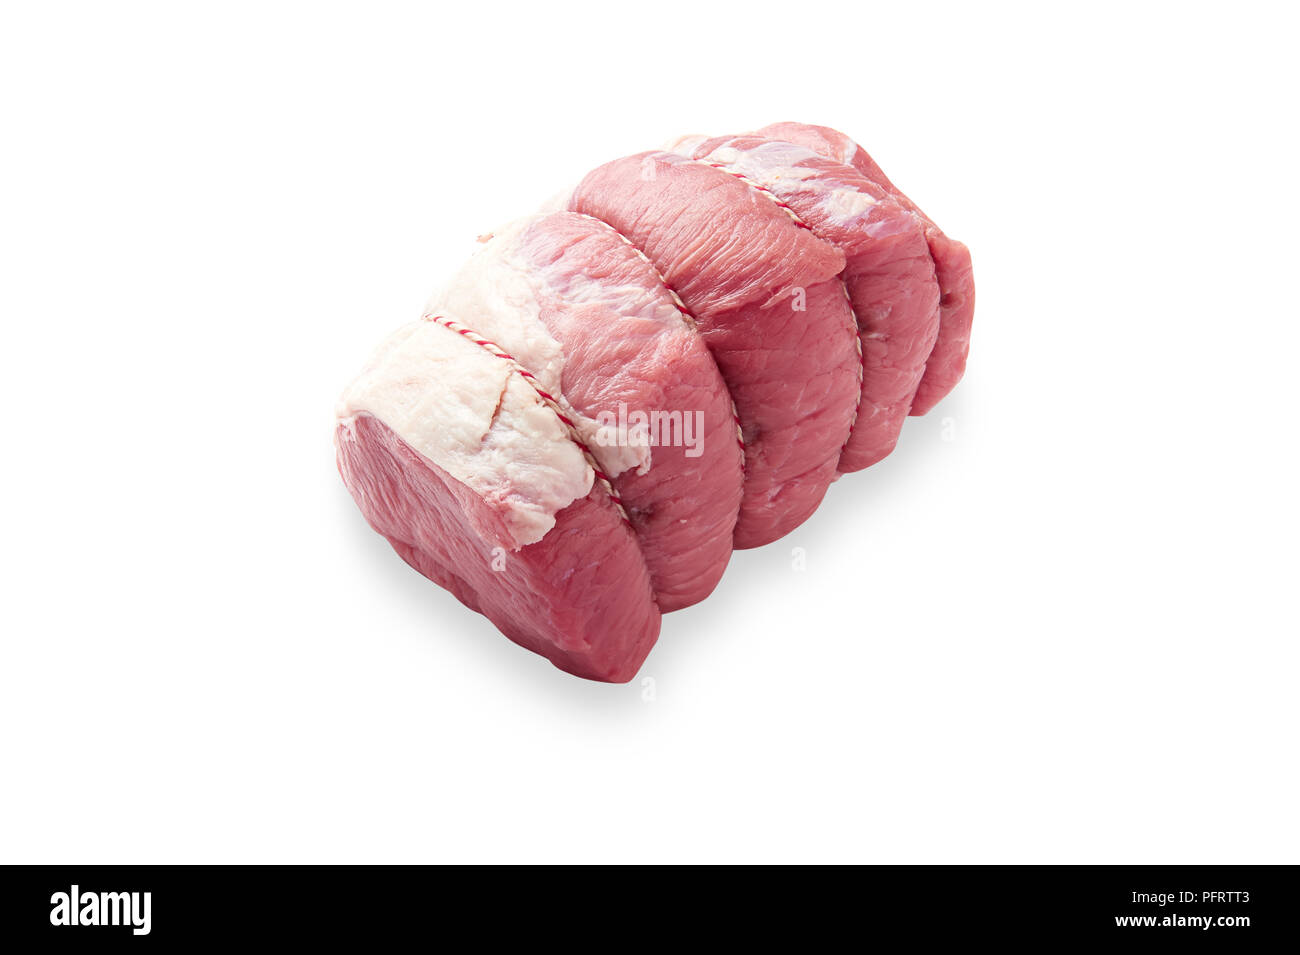 Cuts Veal White Topside Stock Photo